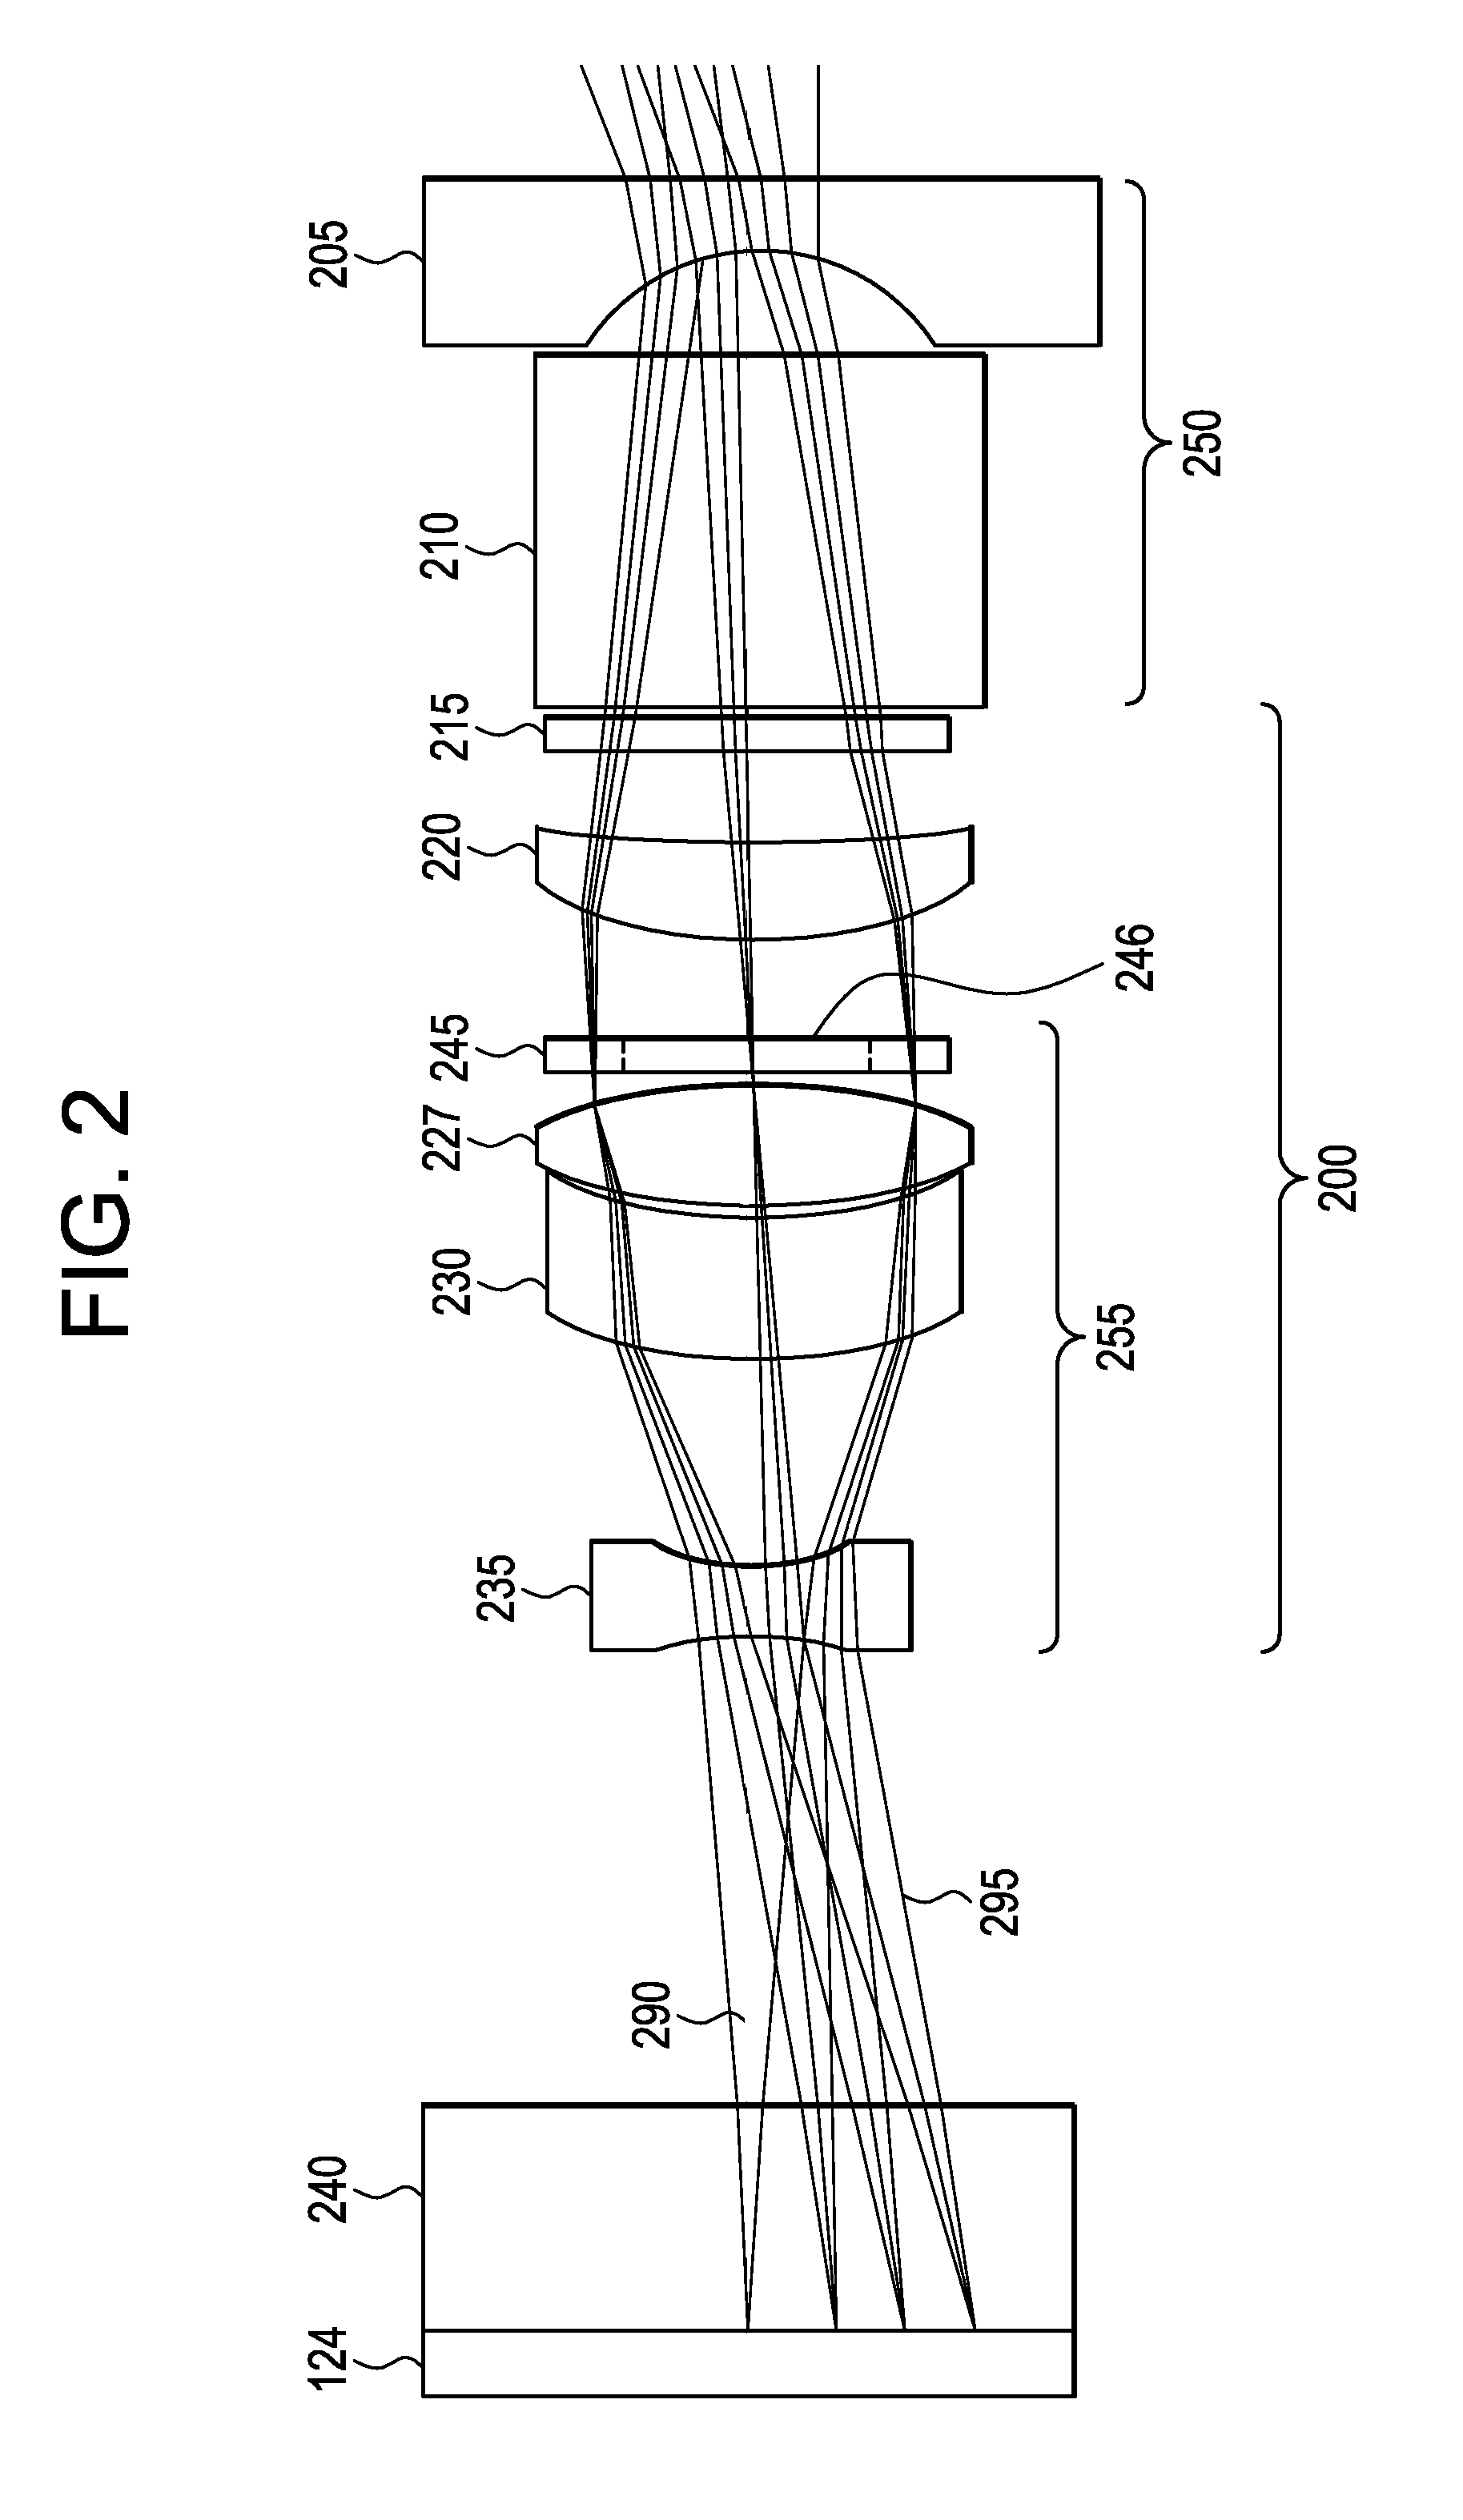 System for providing zoom, focus and aperture control in a video inspection device